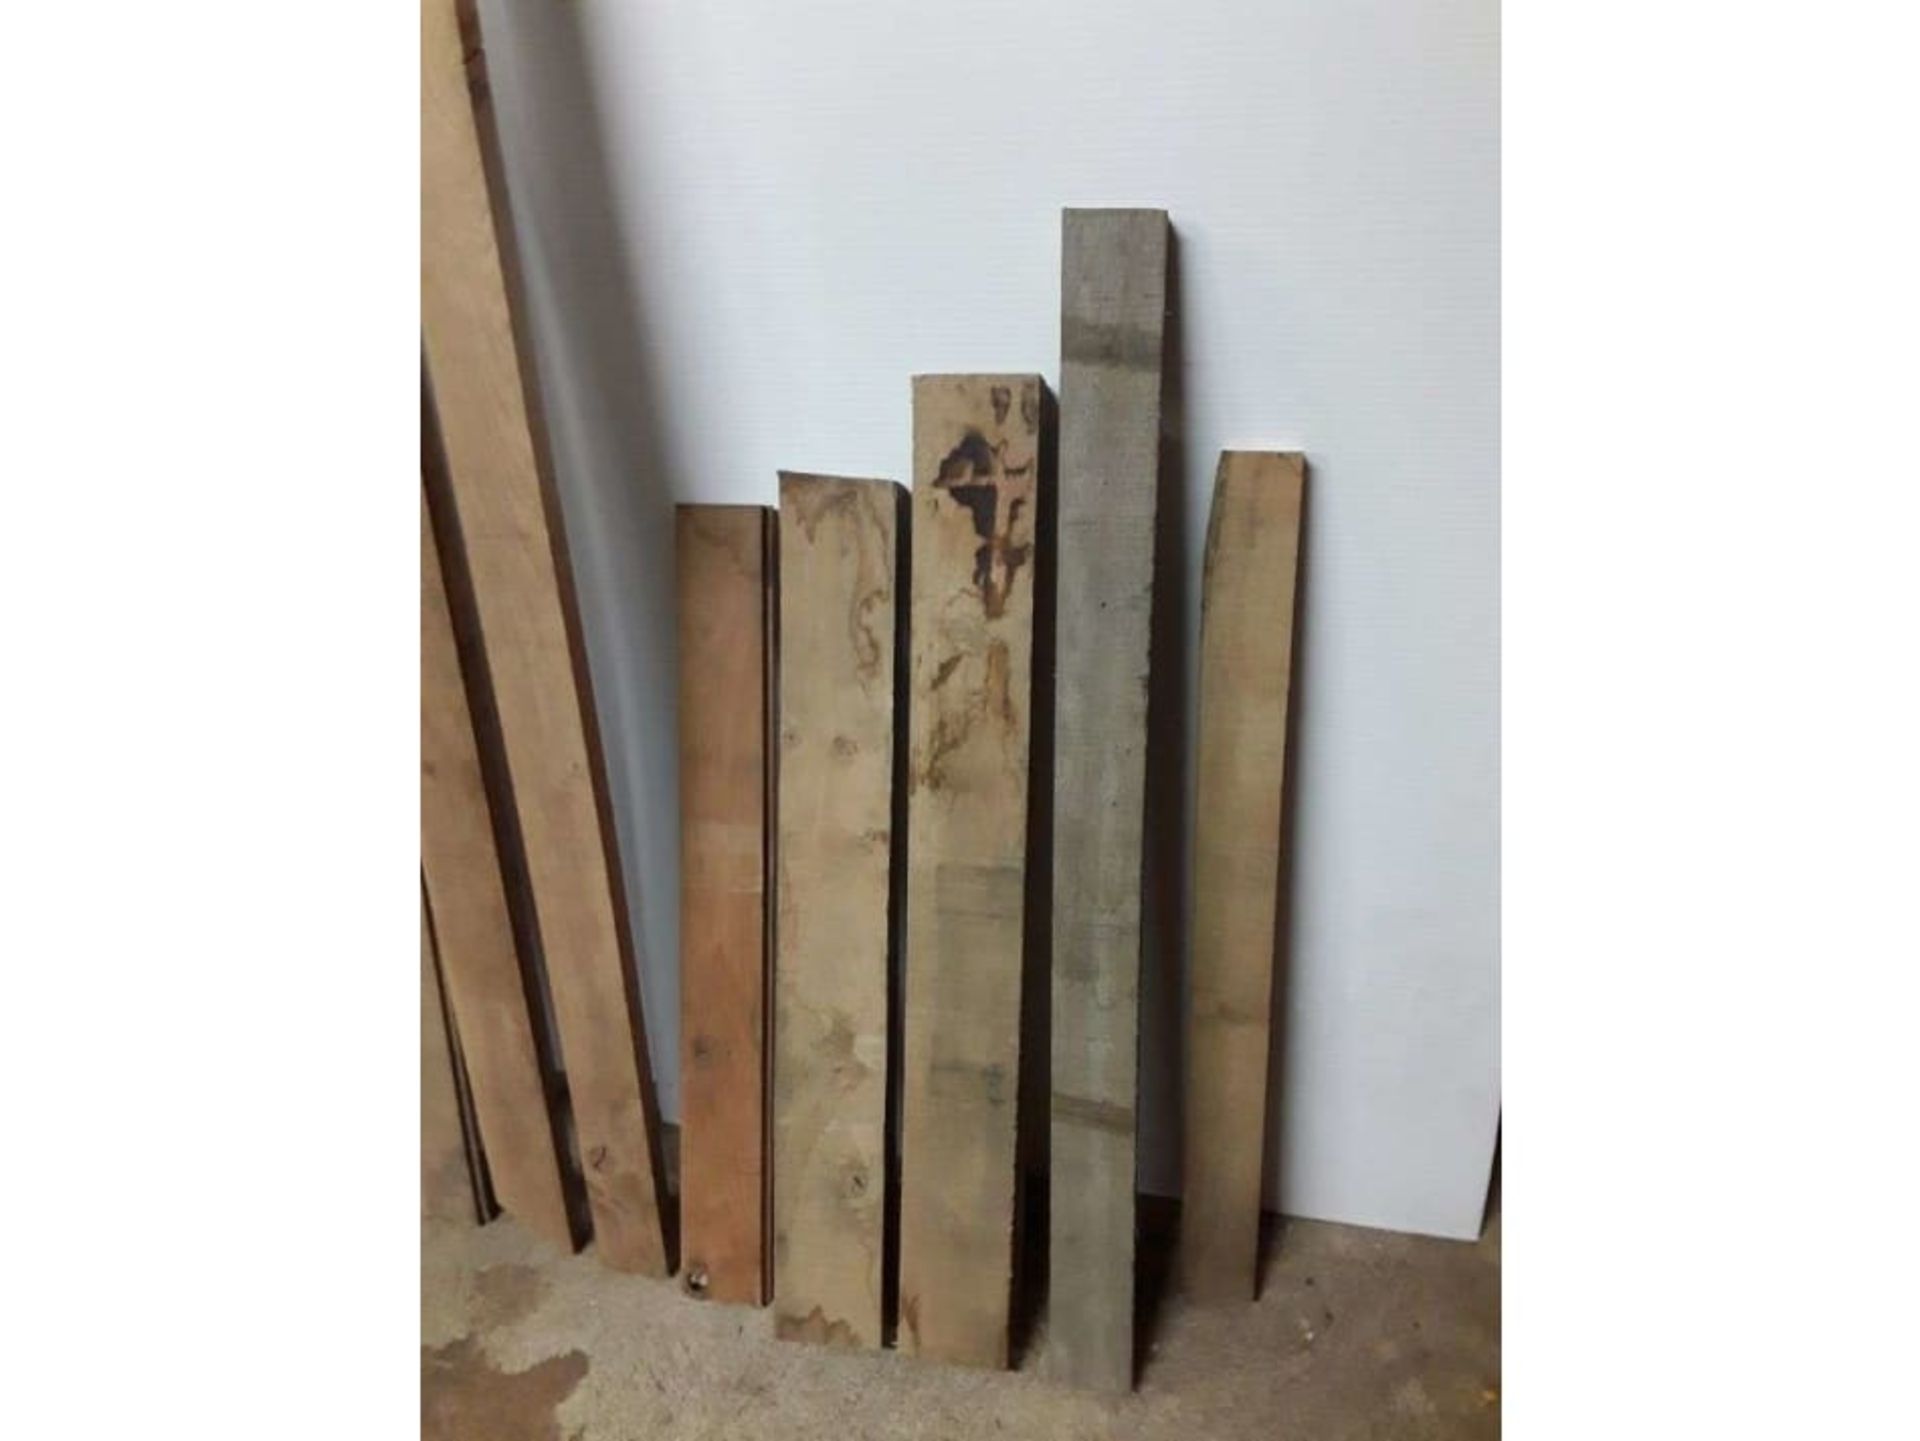 22x Hardwood Dry Sawn English Oak Boards / Planks / Timber Offcuts - Image 2 of 2